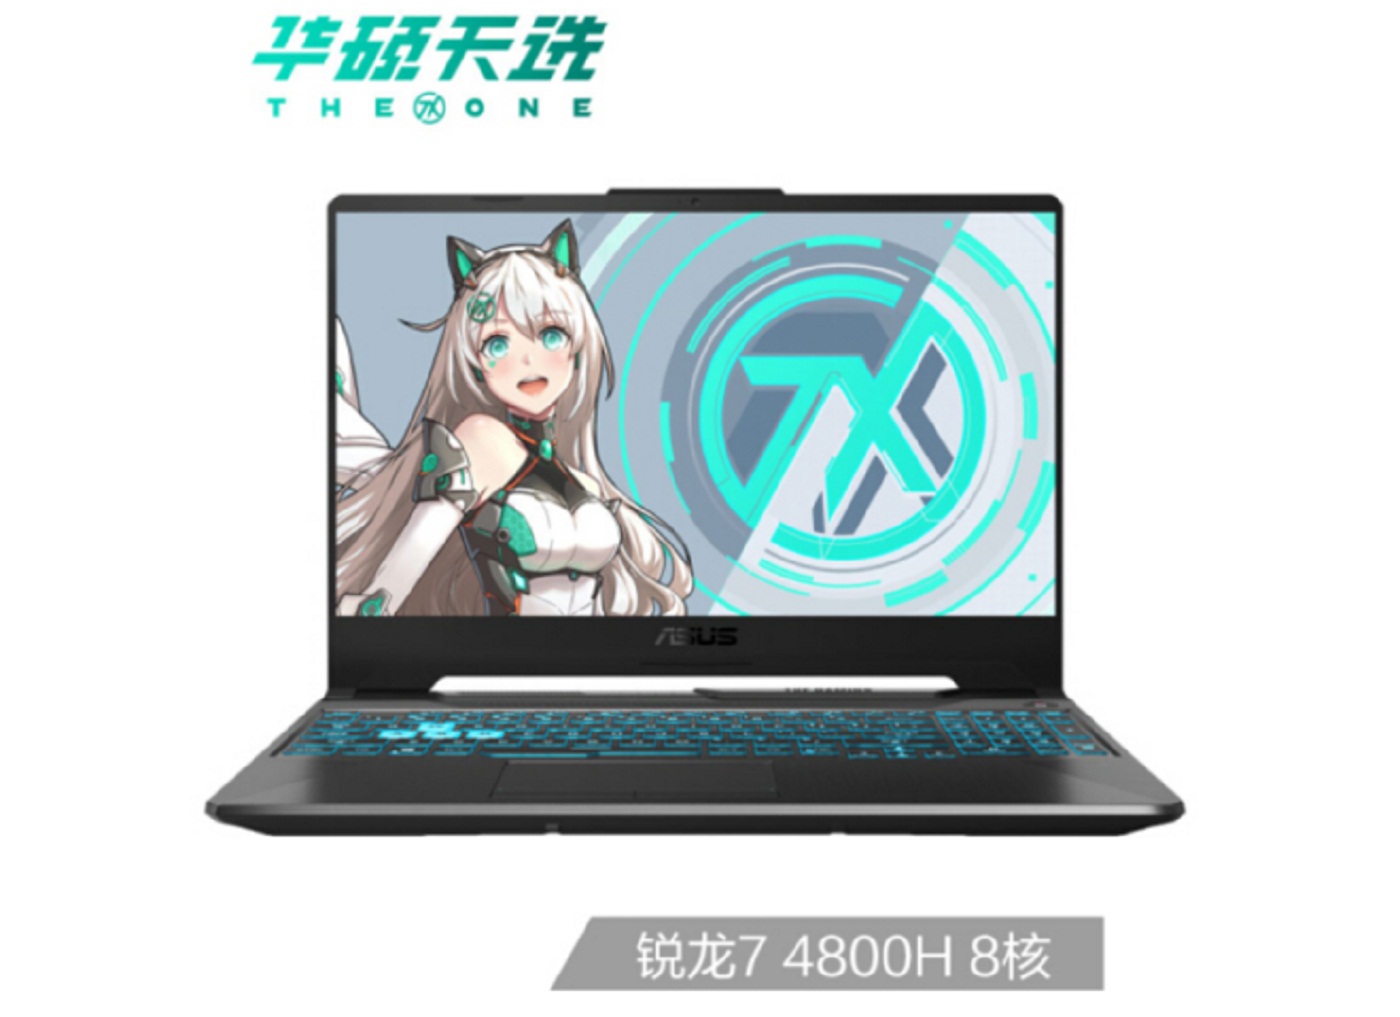 New 144Hz Gaming Laptop Equipped With AMD’s Ryzen 7 4800 (8 Cores) And NVIDIA GeForce RTX Now Sells Over $900 In China